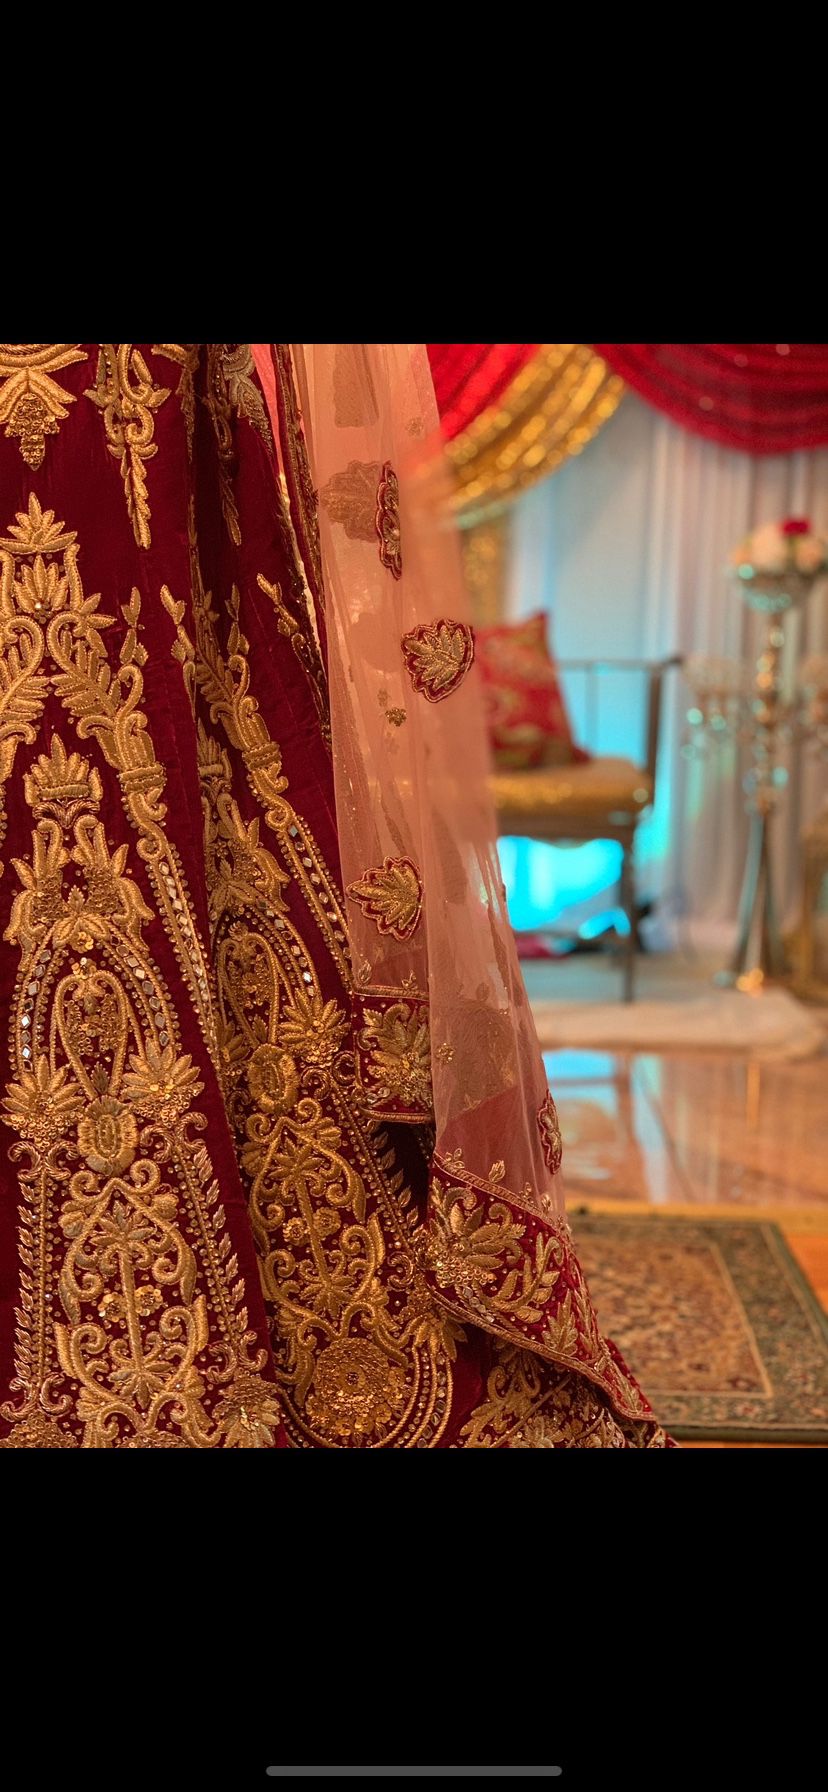 A Classic Indian Bride Two Piece Red Dress 